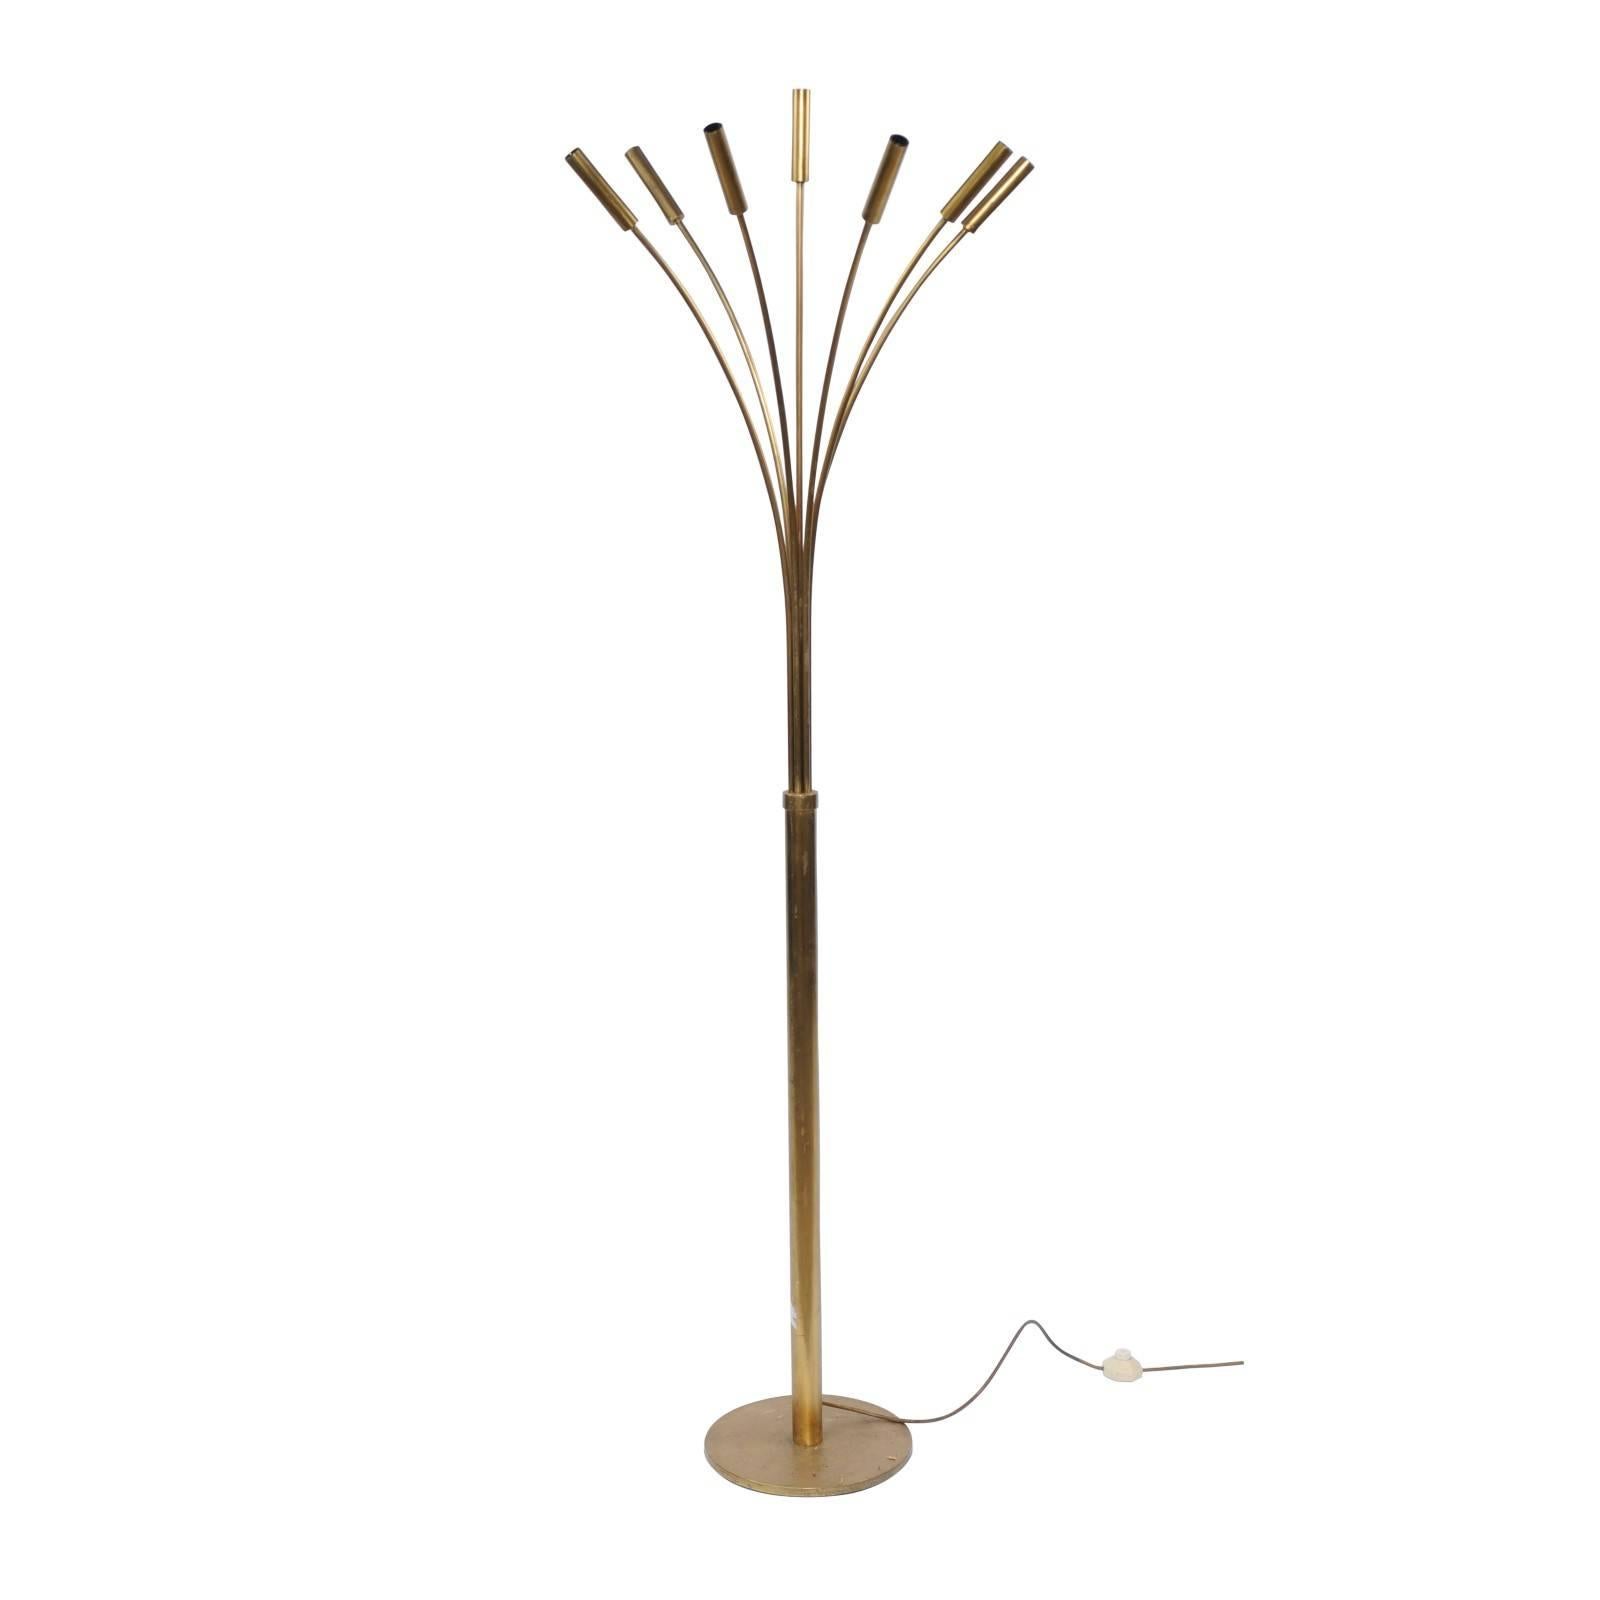 Vintage Italian Seven-Light Brass Floor Lamp with Arched Arms from the 1970s For Sale